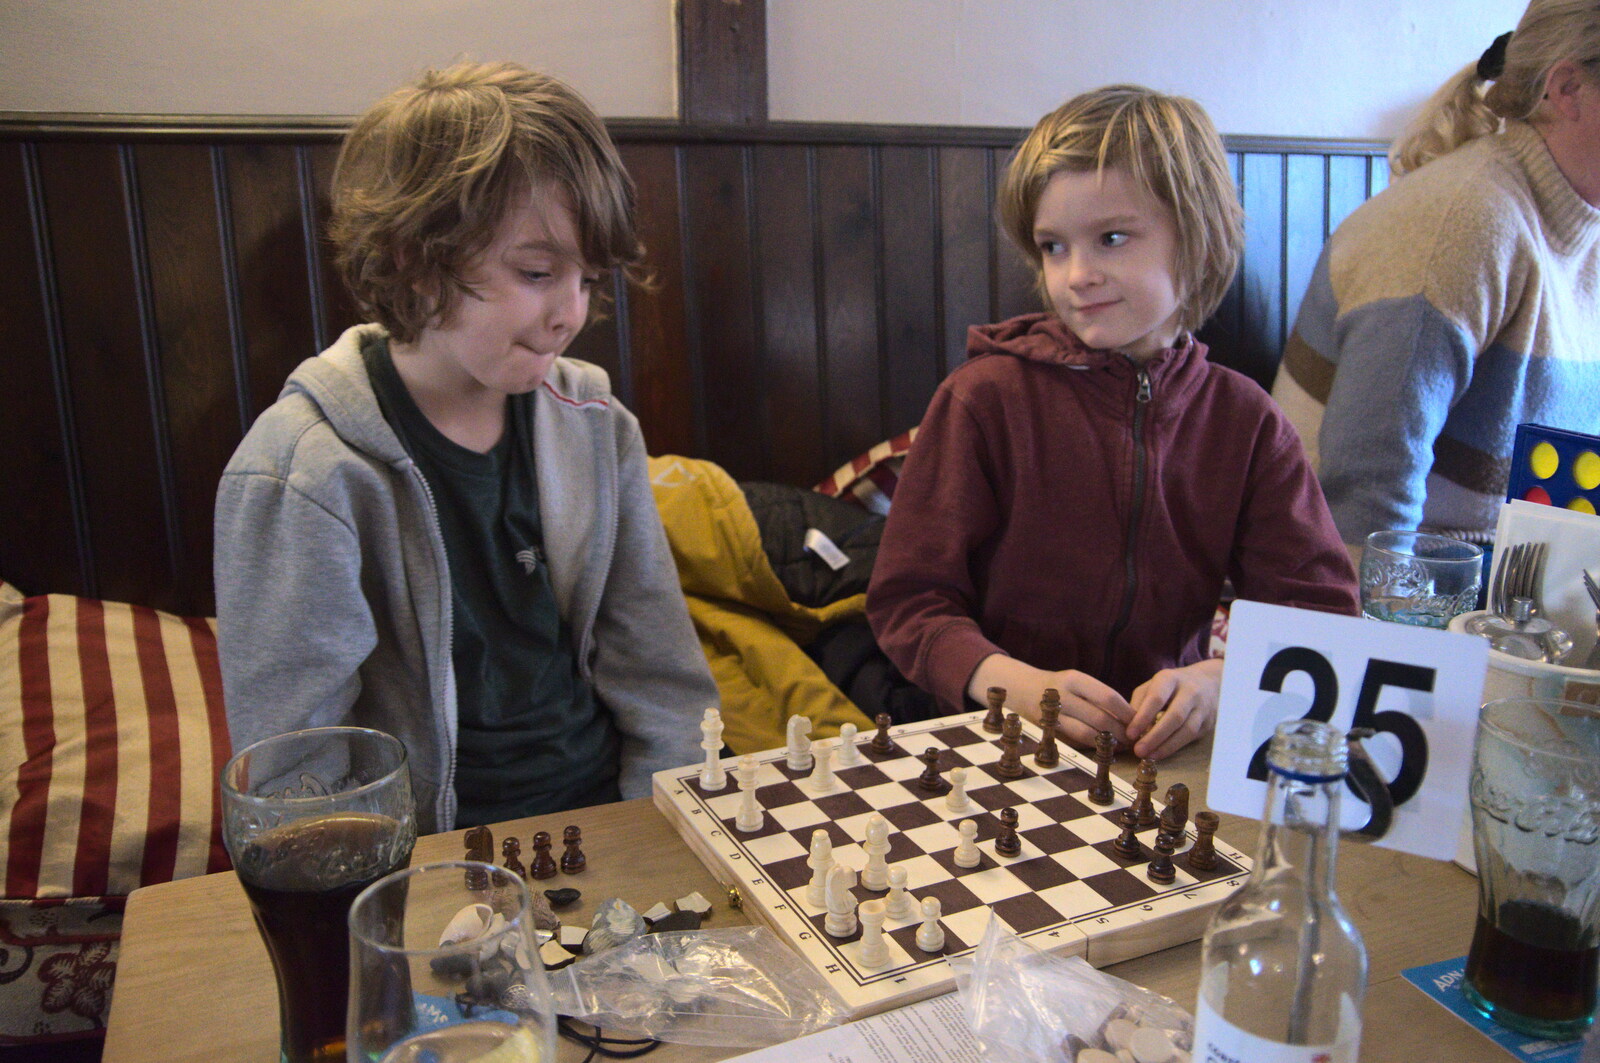 A Trip to Orford, Suffolk - 25th January 2020: The boys play chess